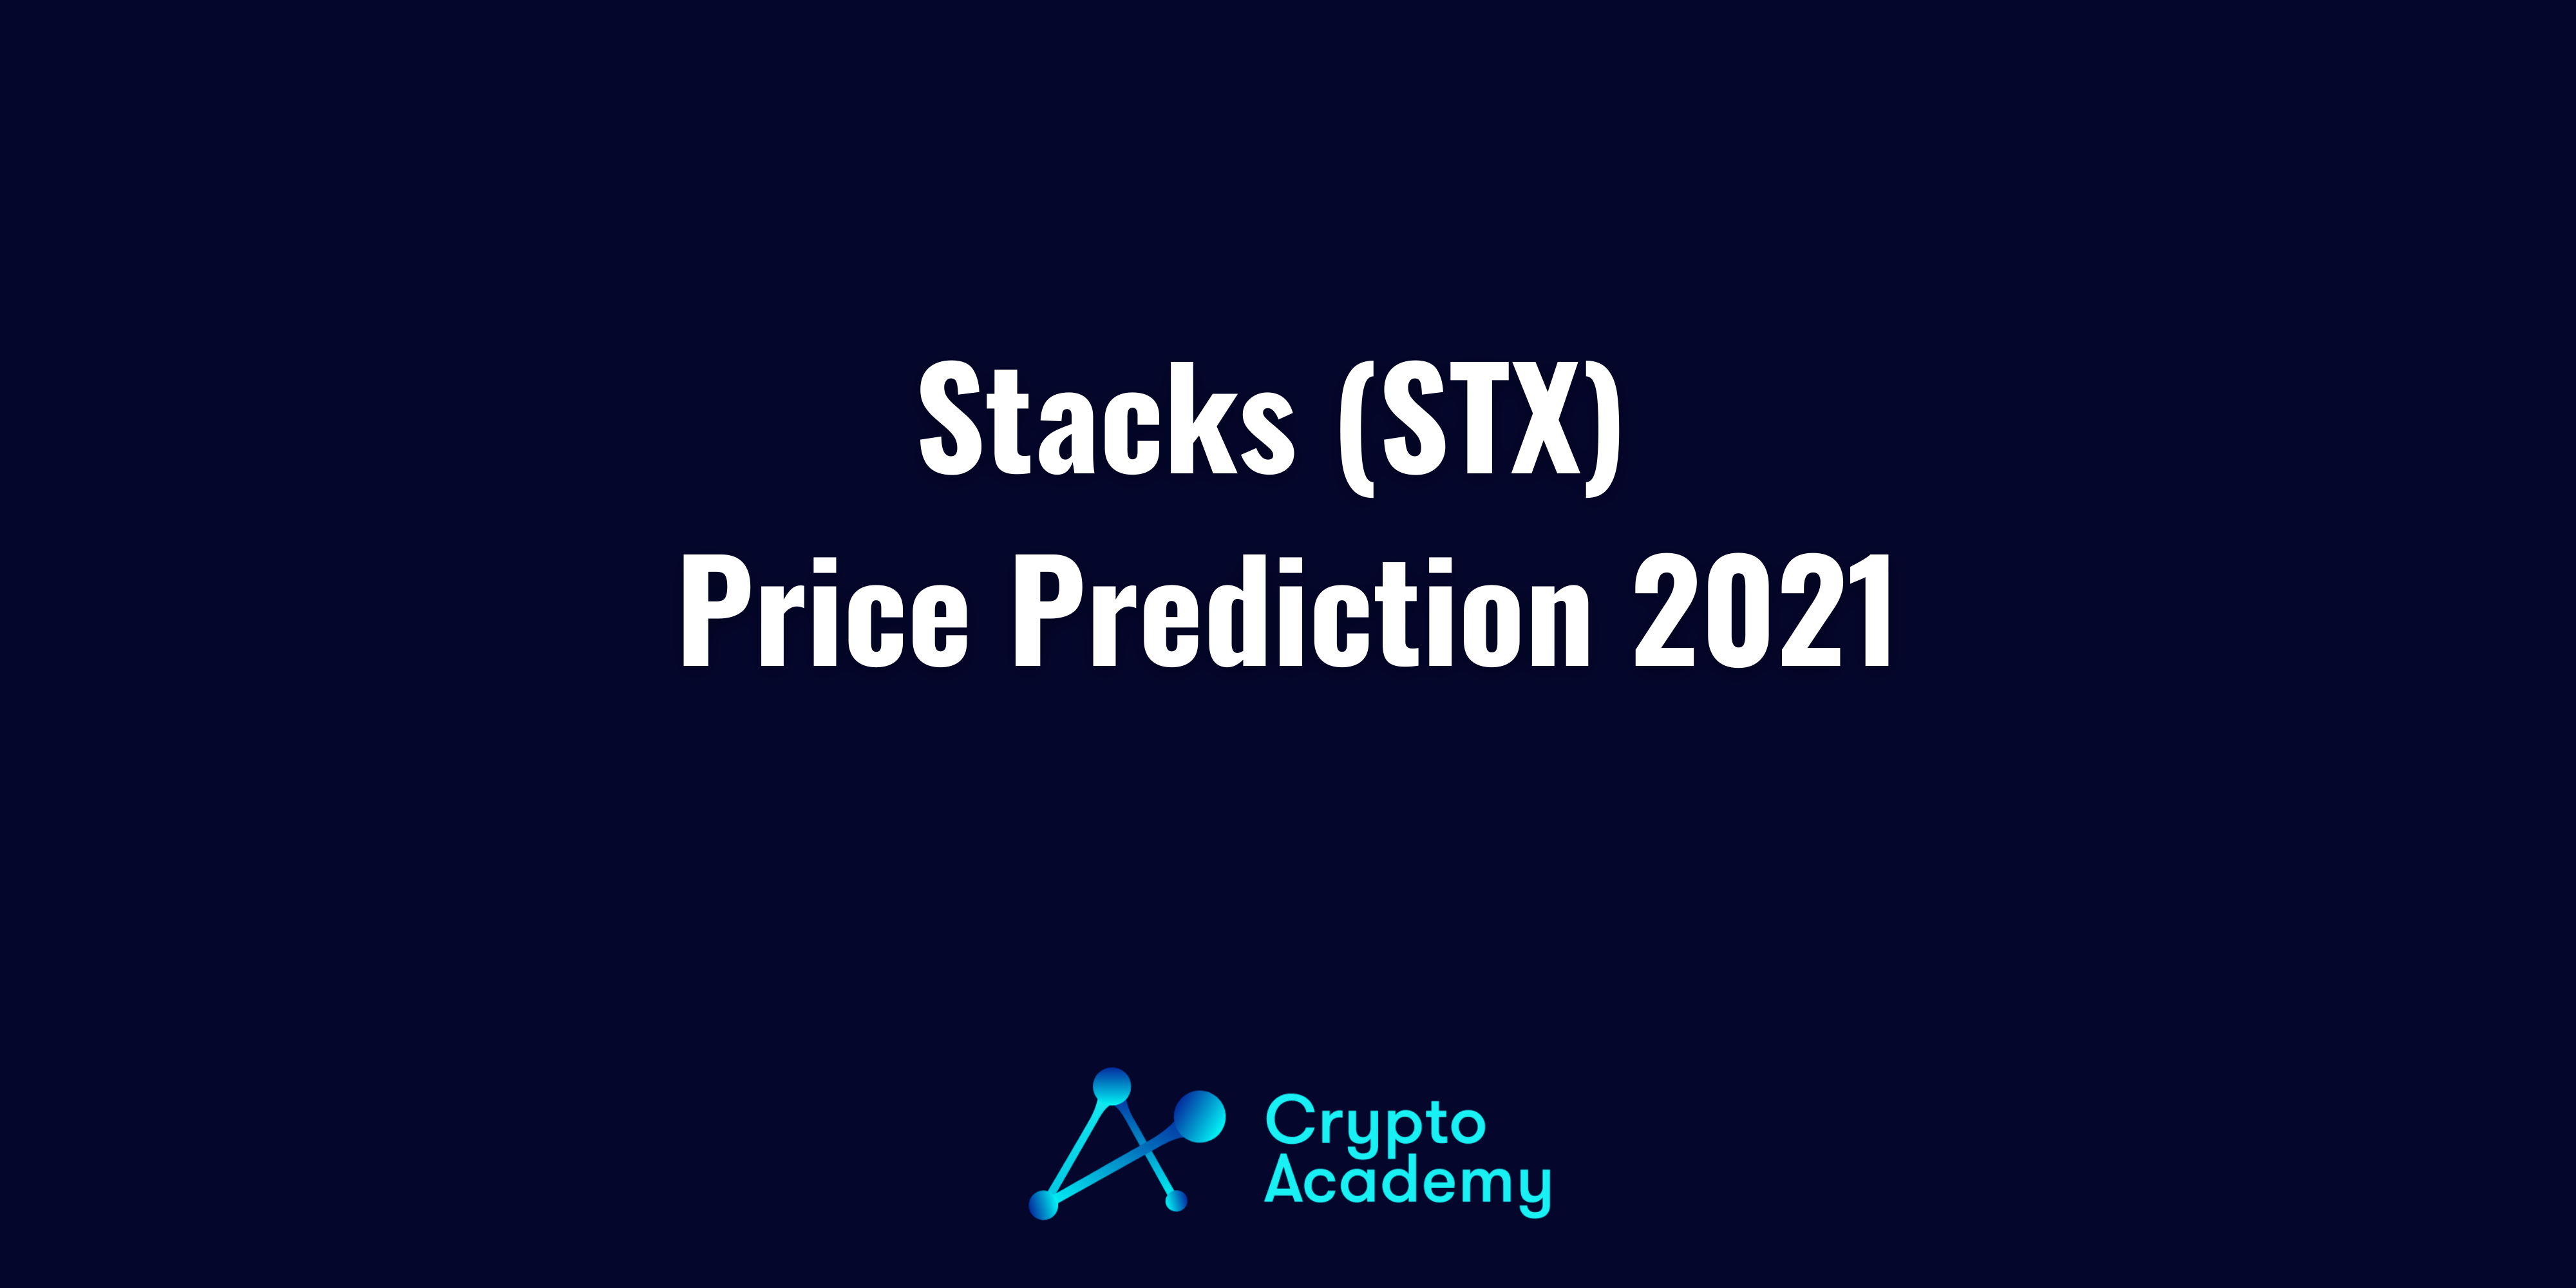 Stacks (STX) Price Prediction 2021 and Beyond – Is STX a Good Investment?